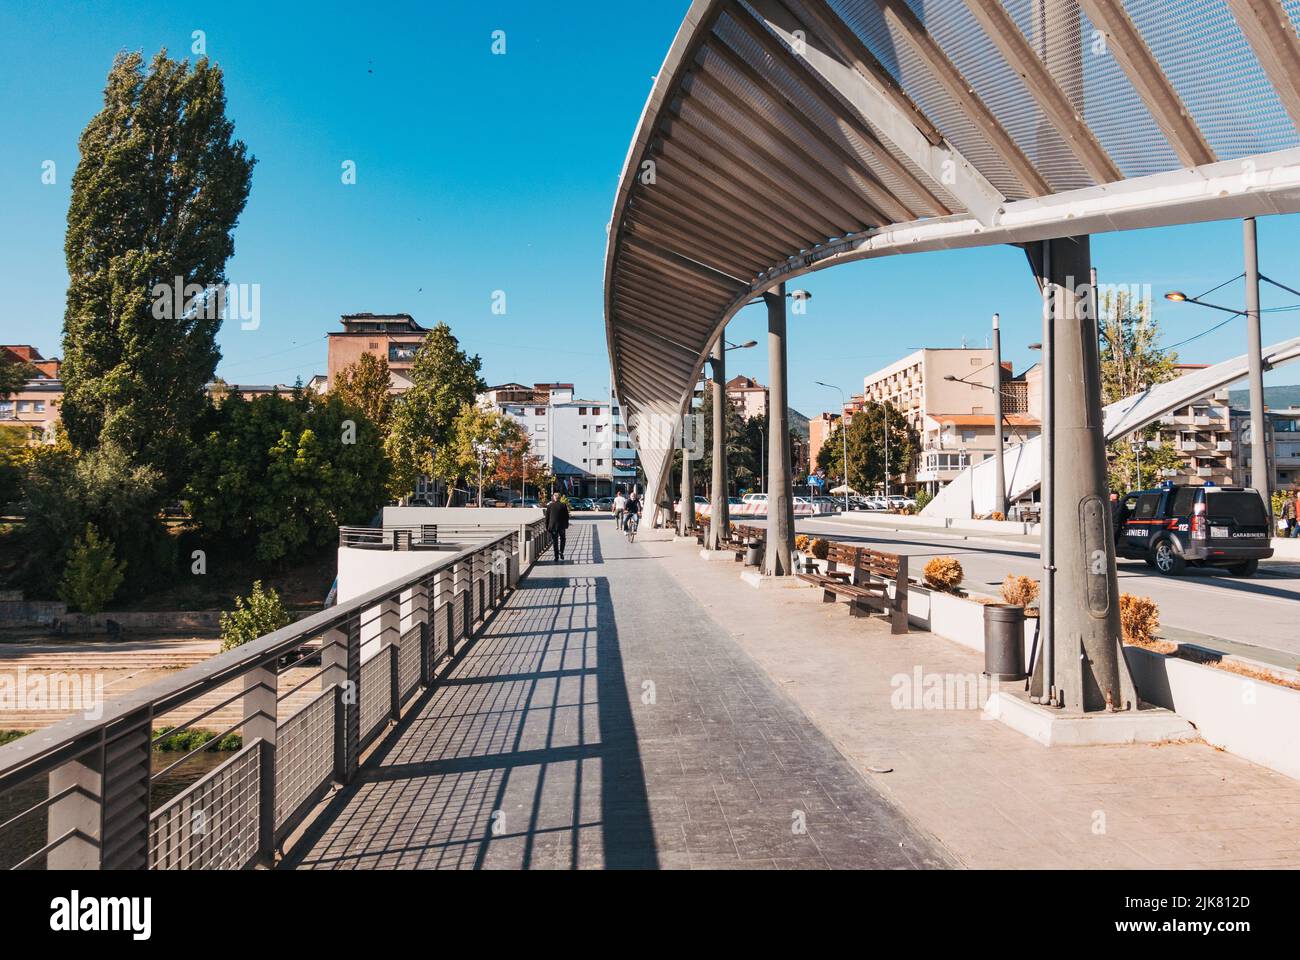 a sidewalk on the New Bridge in Mitrovica, Kosovo. The bridge connects the city's Serb north with the Kosovar south and has seen historical tensions Stock Photo